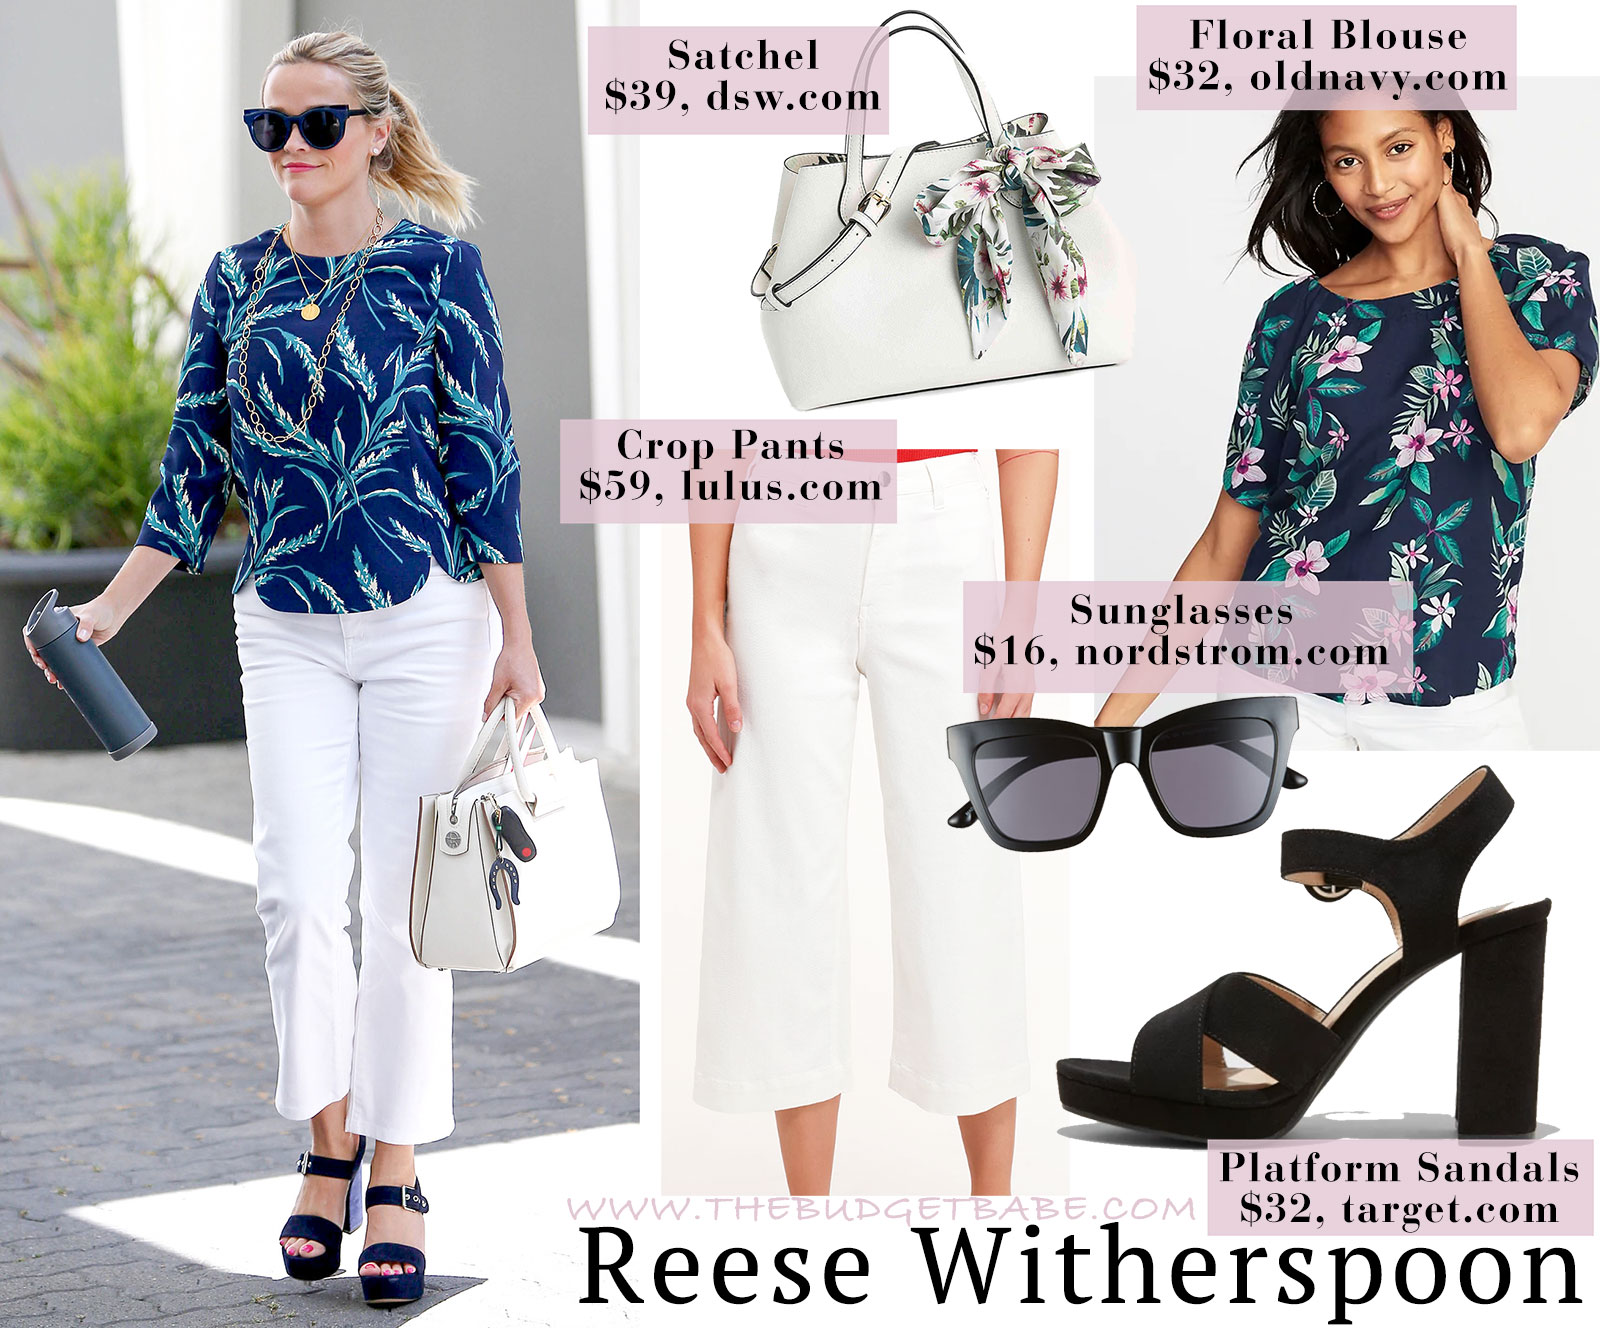 Reese Witherspoon's Floral Top, White Pants and Platform Sandals Look for Less